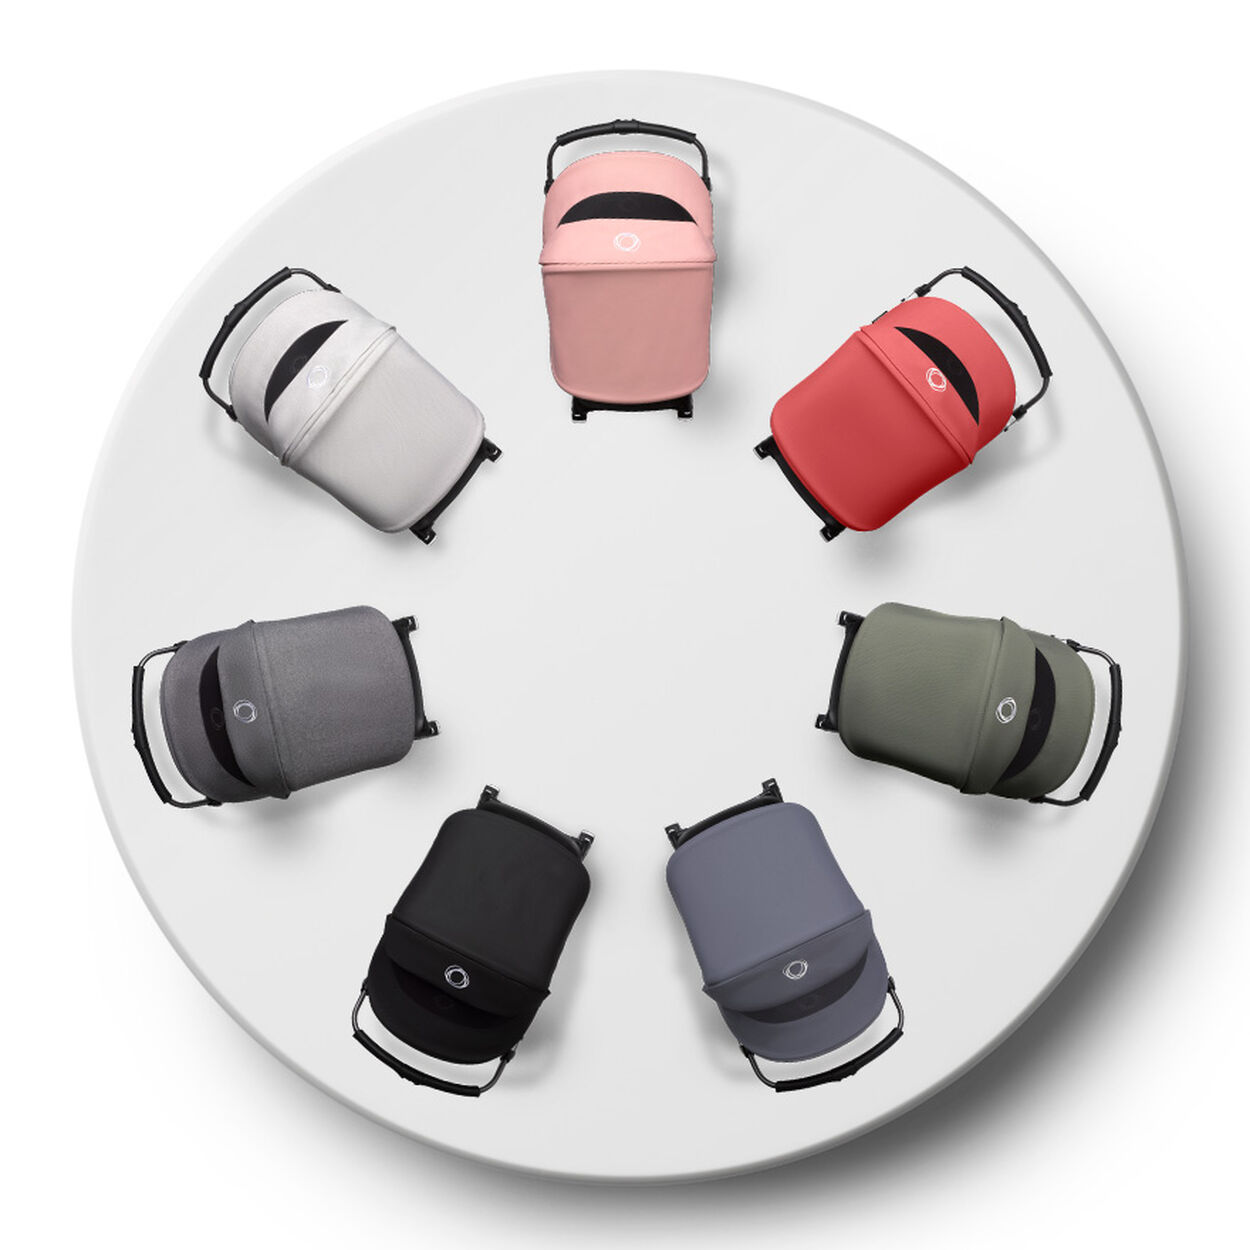 Seven Fox 3 strollers in different colors arranged in a circle.